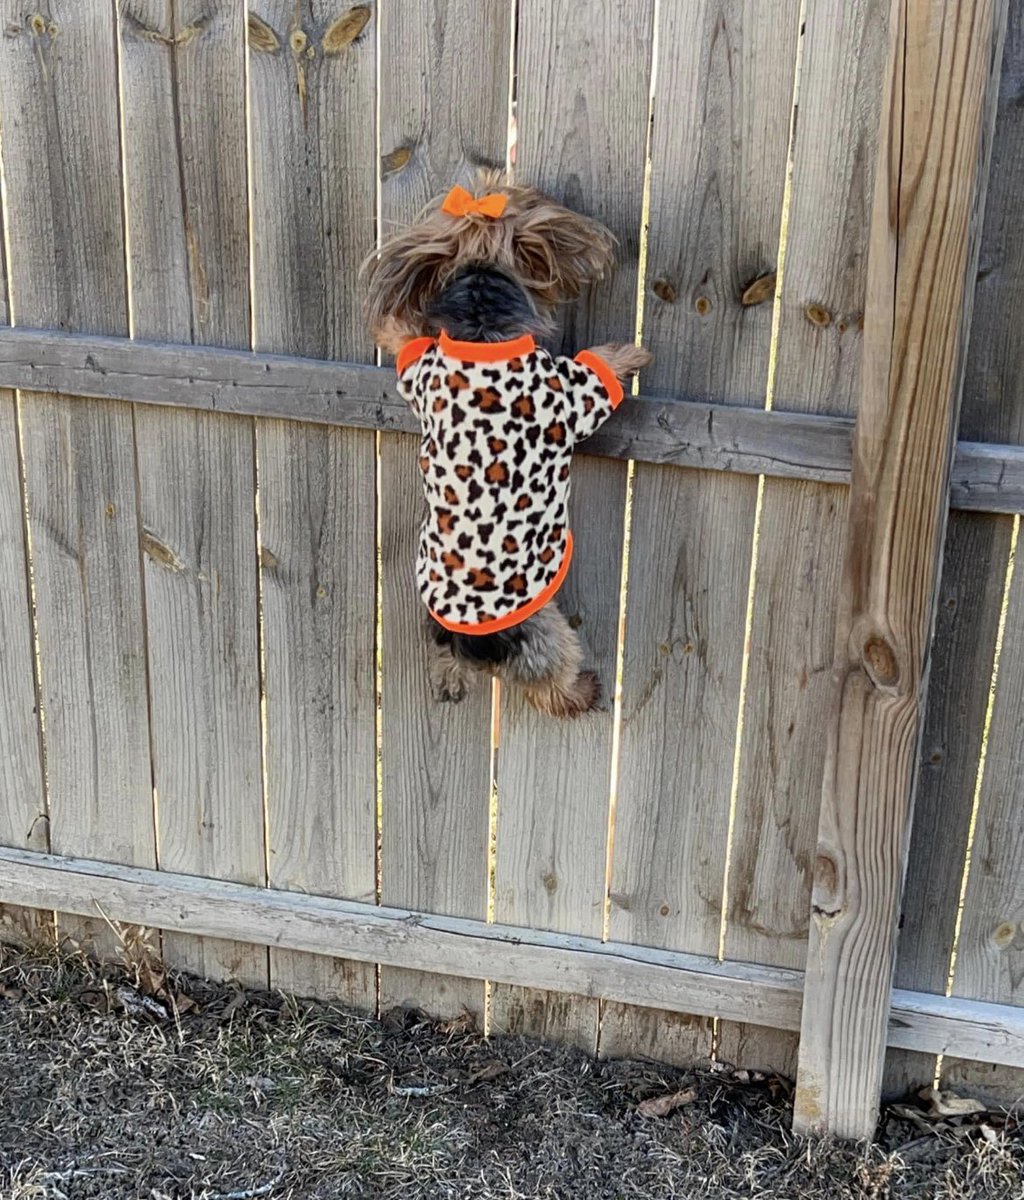 Don't mind me. Just stalking the neighbor. #yorkie #cute #cutedogs #cutedog #love #puppylove #Dog #dogs #doglife #DogsofTwittter #DogsOnTwitter #dogsarefamily #dogsoftwitter #doglove #doglover #doglovers #neighborhoodwatch